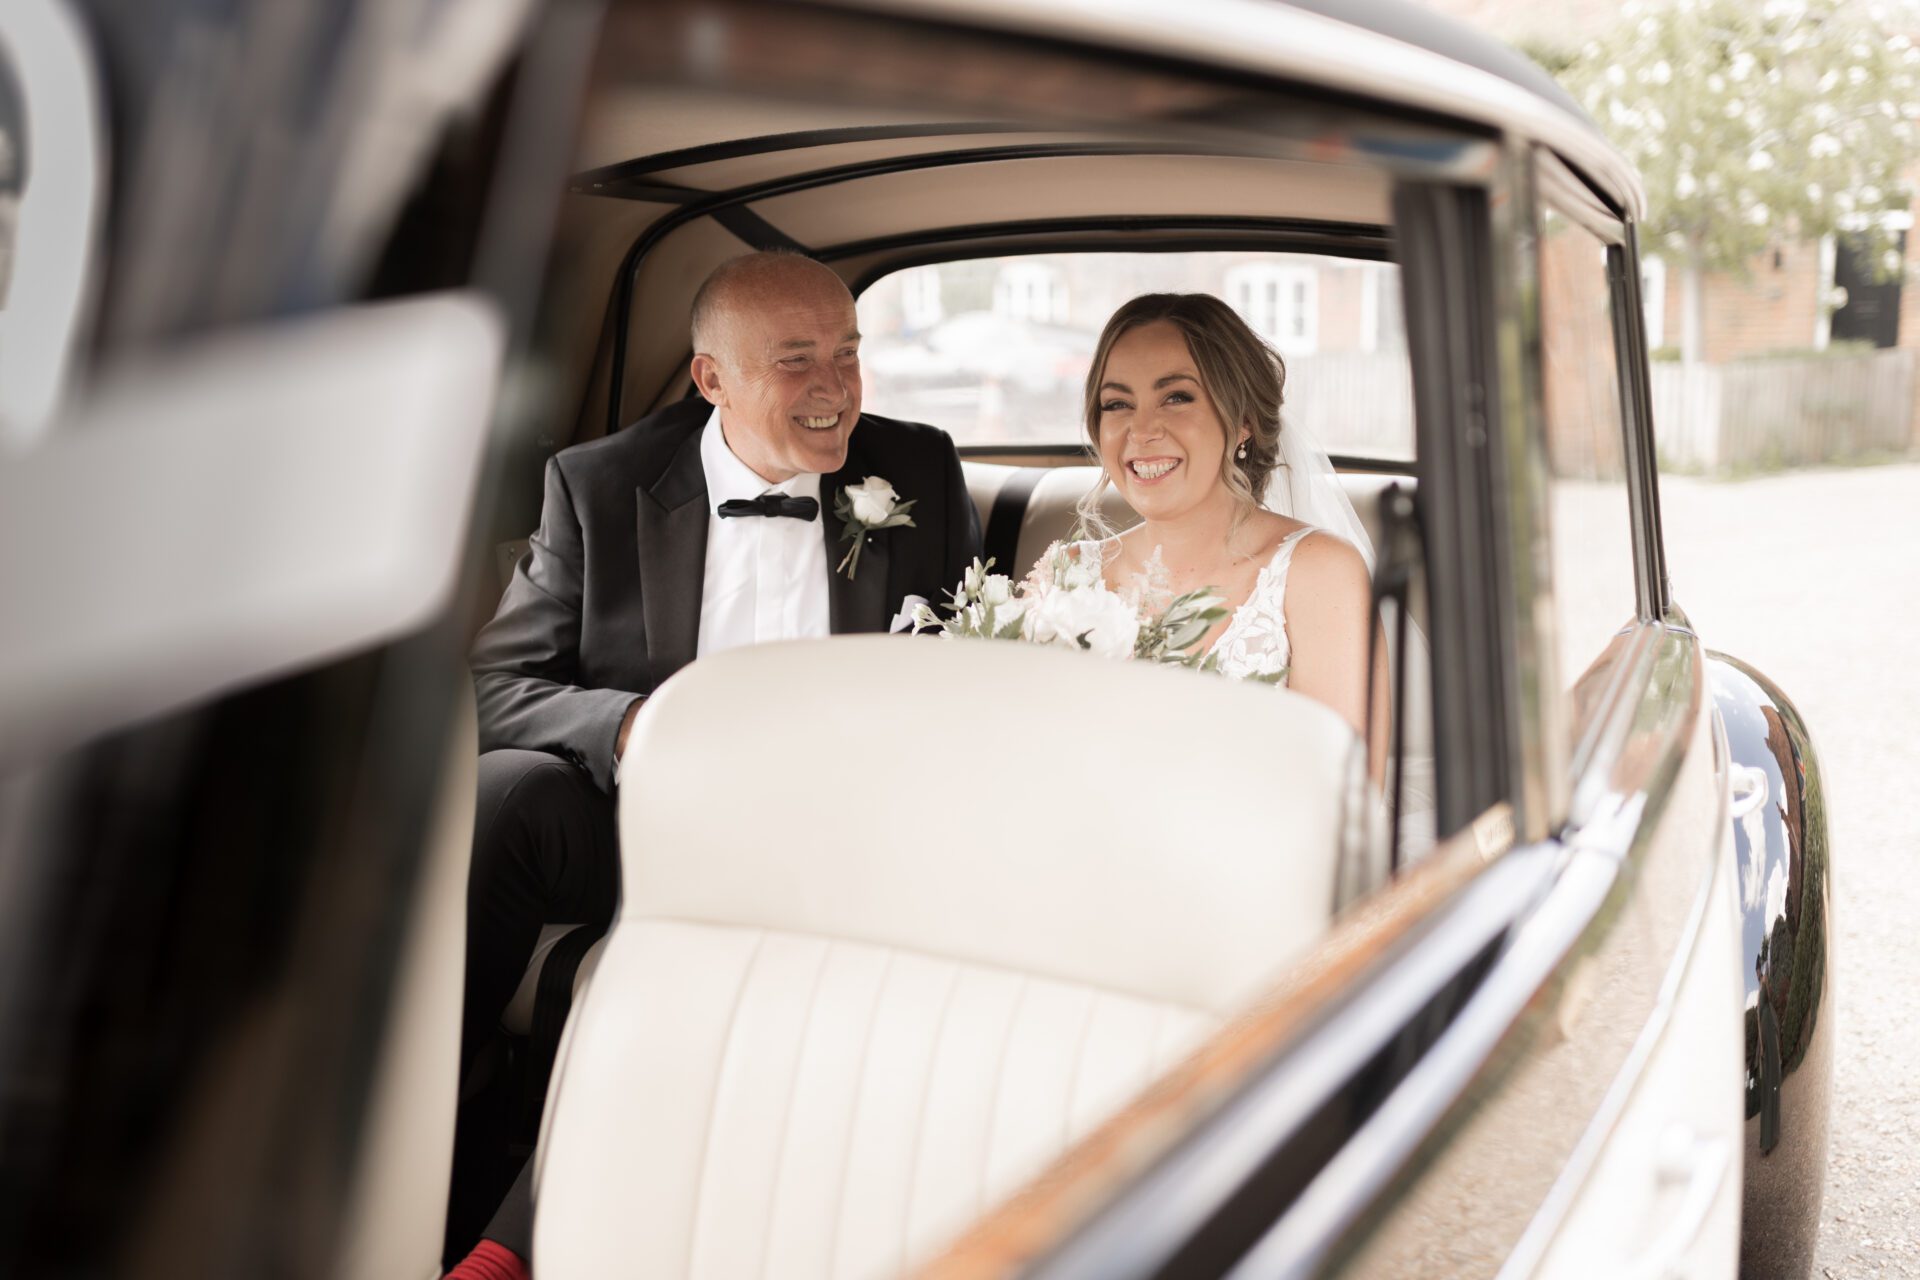 The bride and her father arrive at the church wedding ceremony in a vintage wedding car